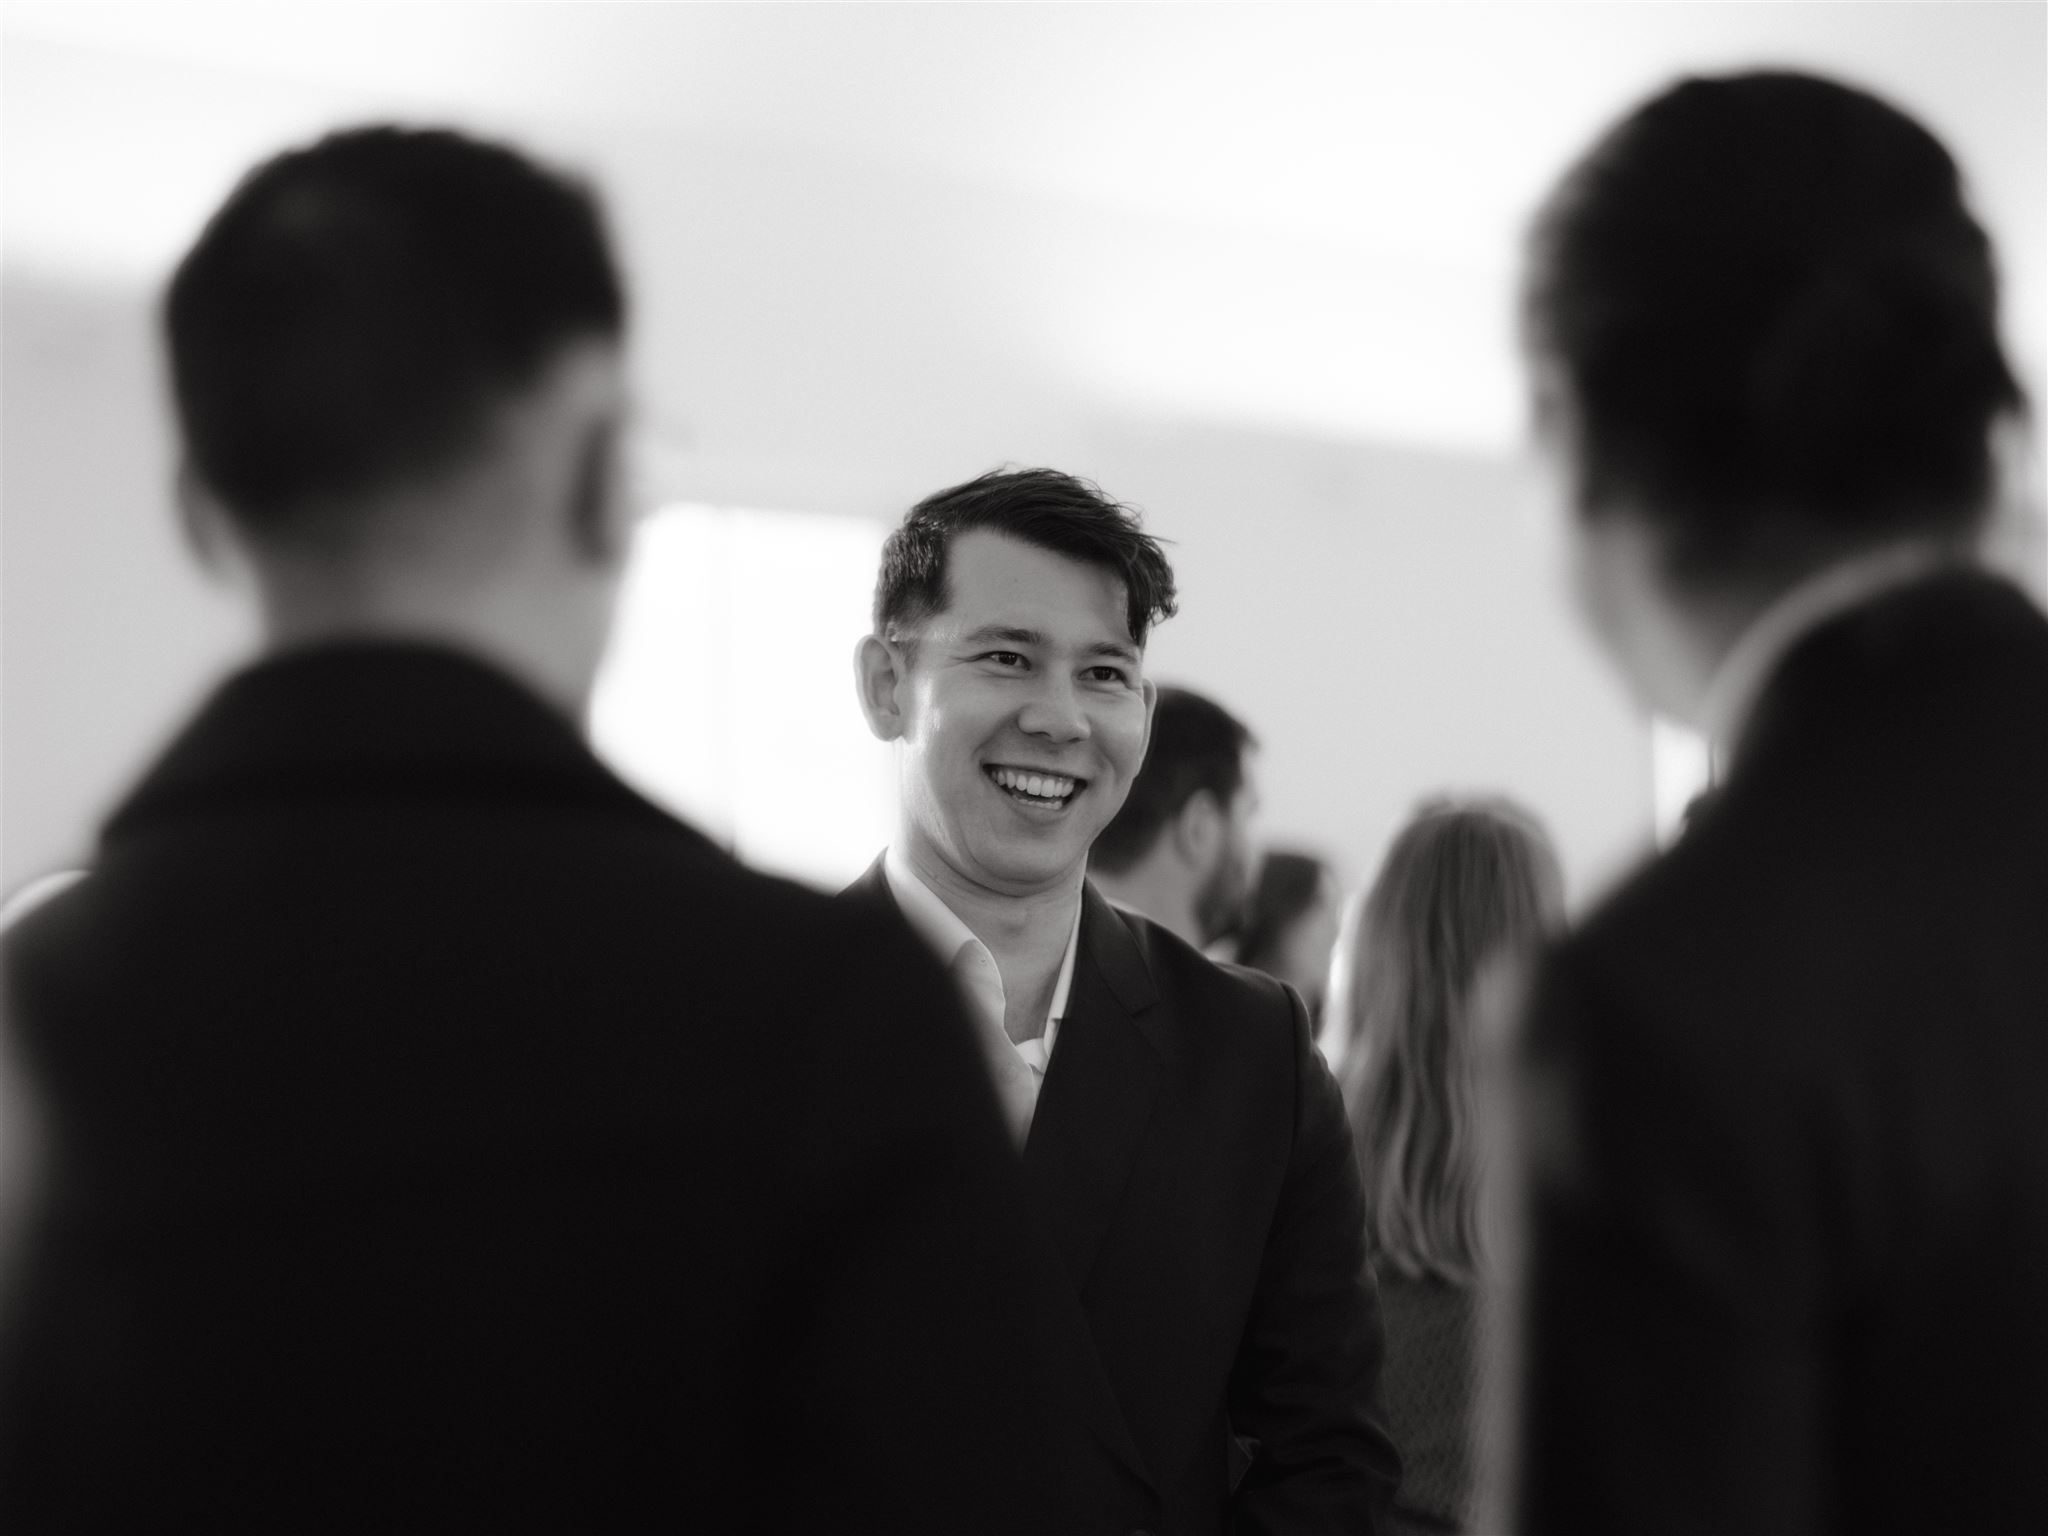 Black and white candid photo of the groom-to-be chatting with guests in their welcome dinner. Image by Jenny Fu Studio